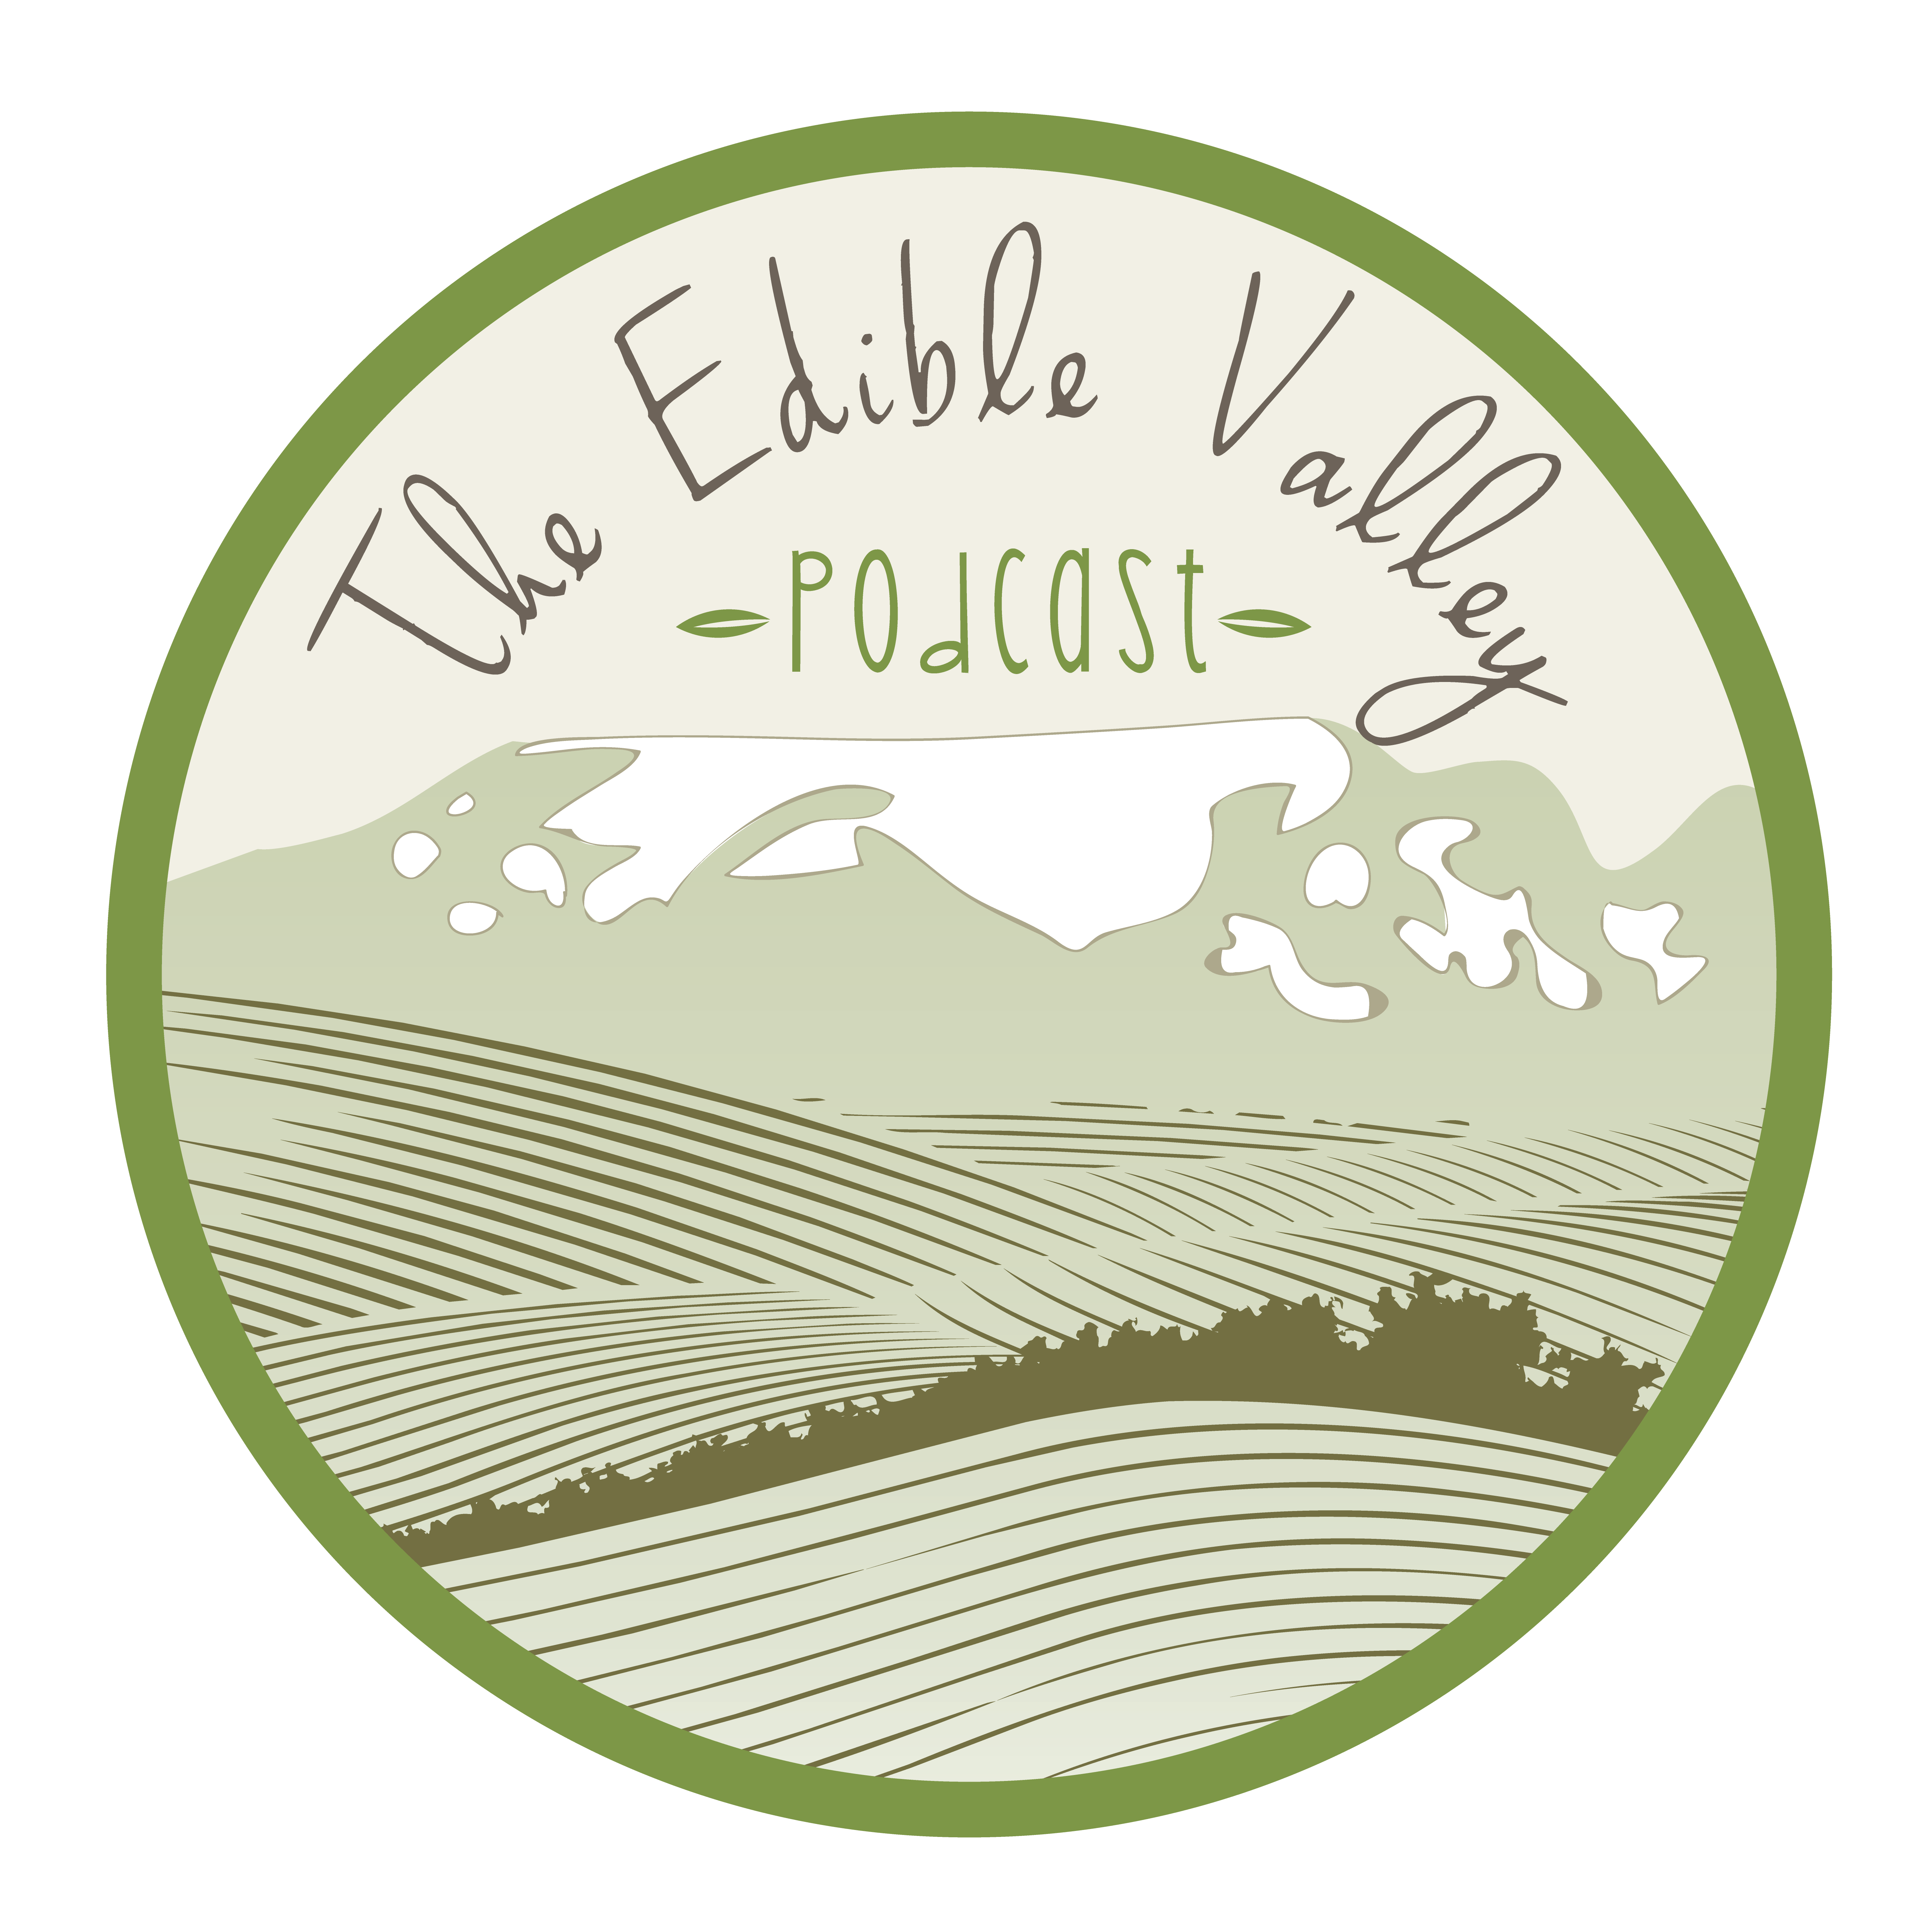 Edible Valley Food Facts #2-Chicken